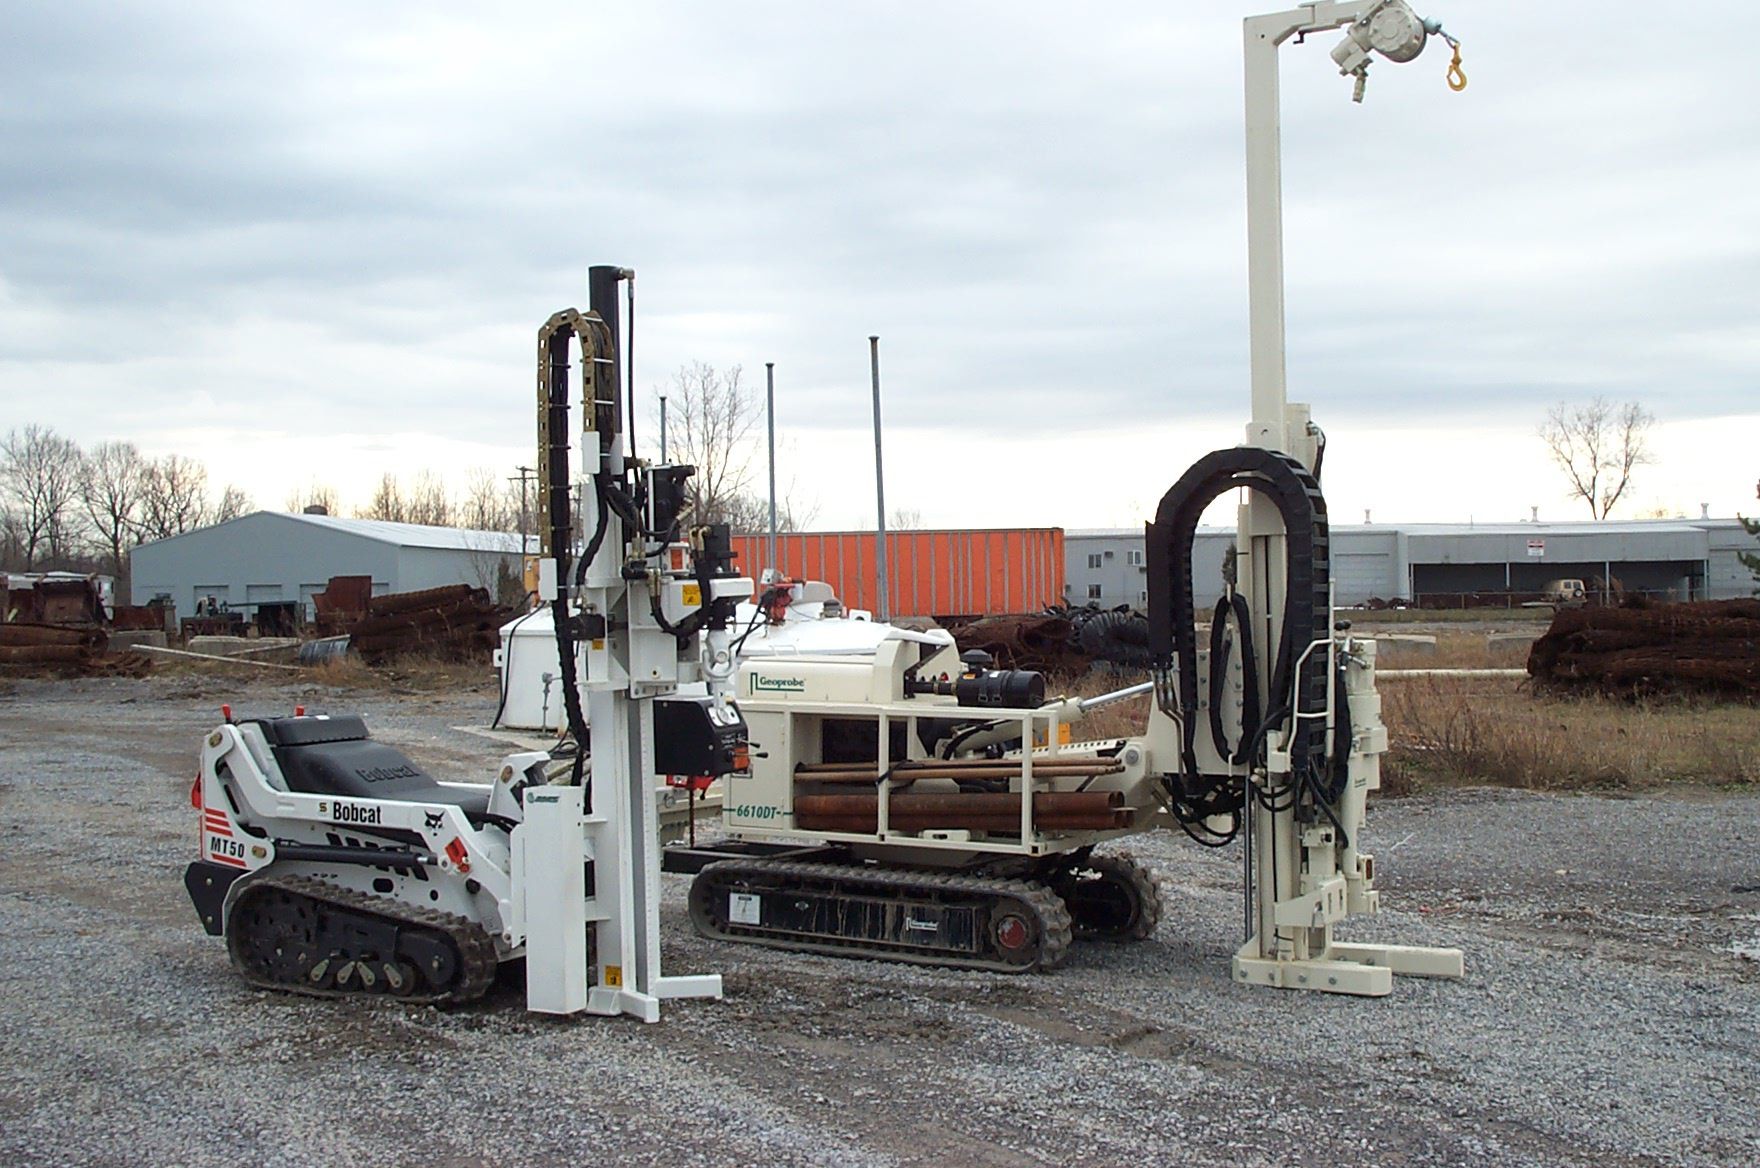 two drill rigs are parked in a gravel lot